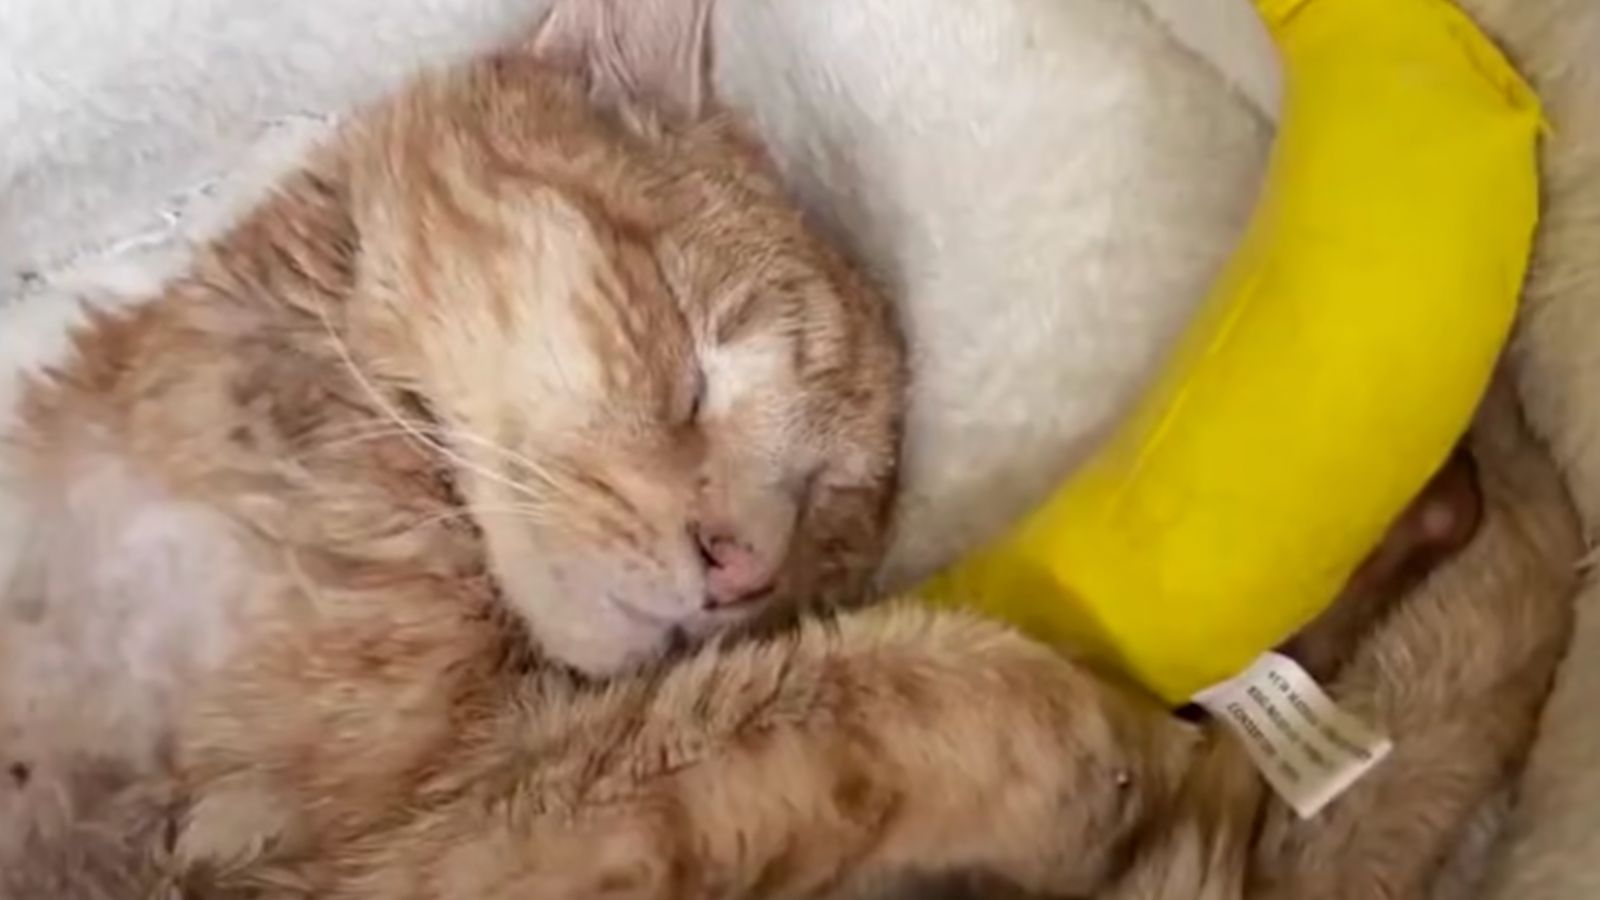 Who knew bananas could be so cuddly? Cat Called Otto